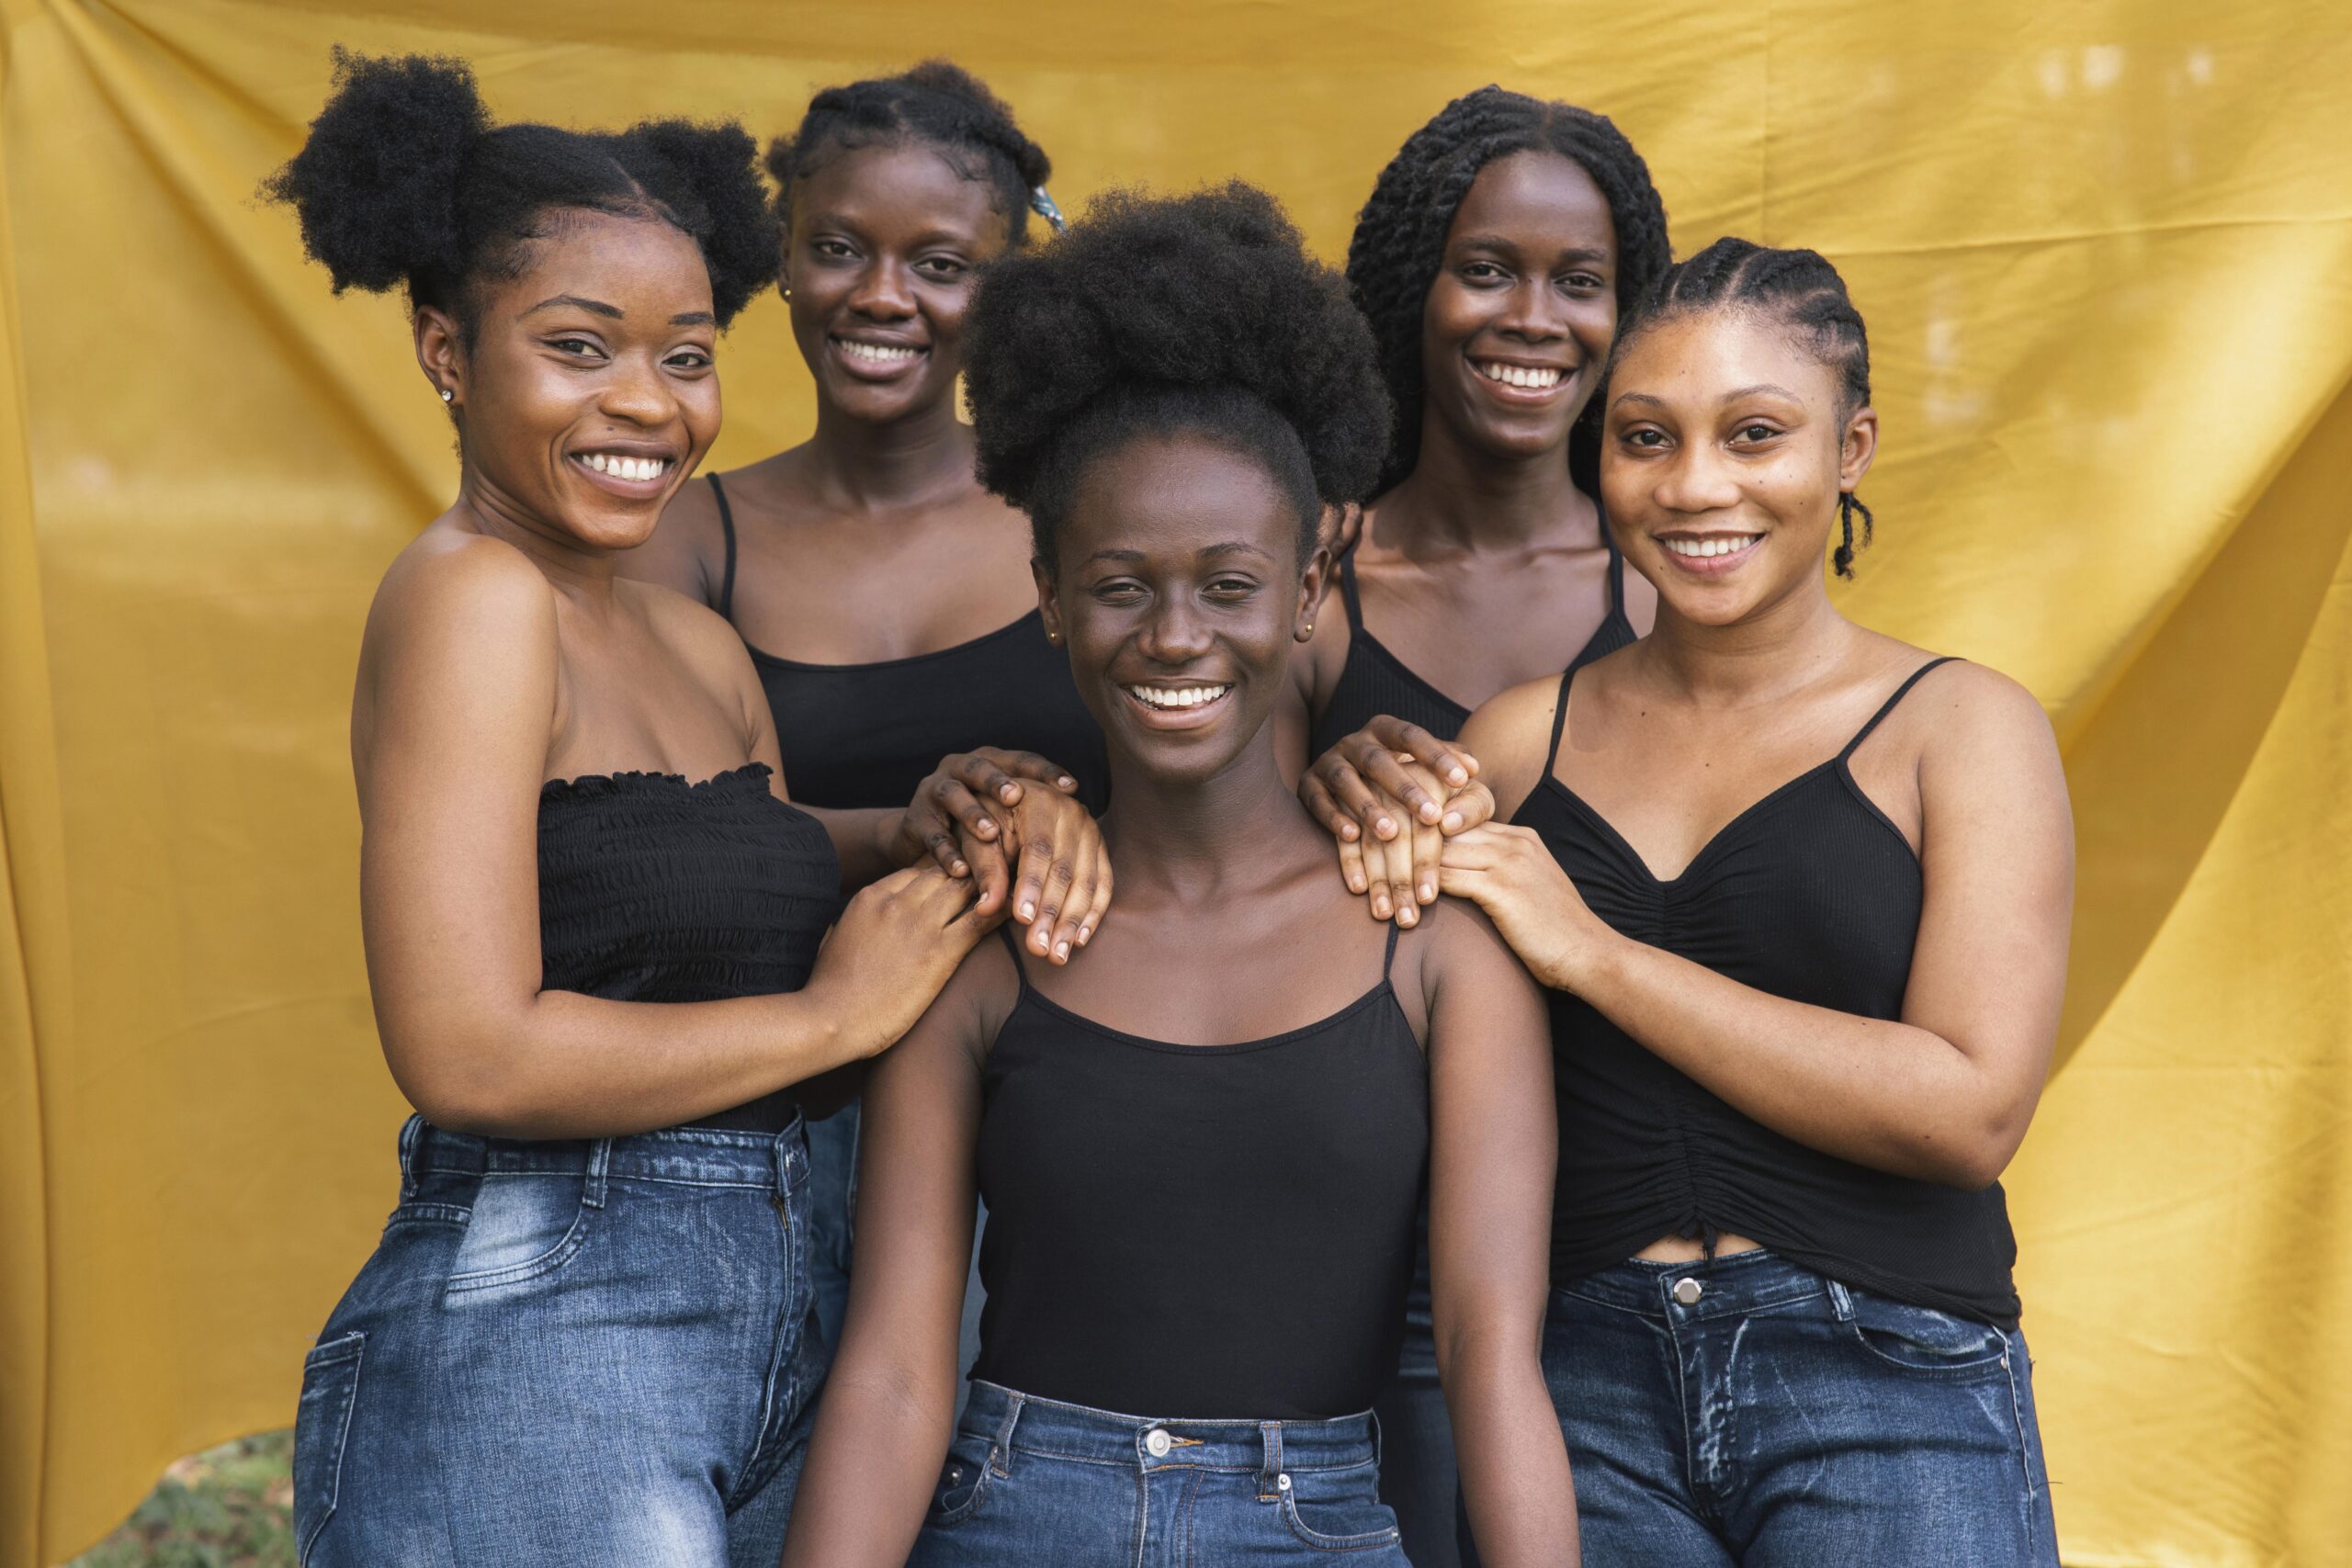 Five black women with afro hair posing together